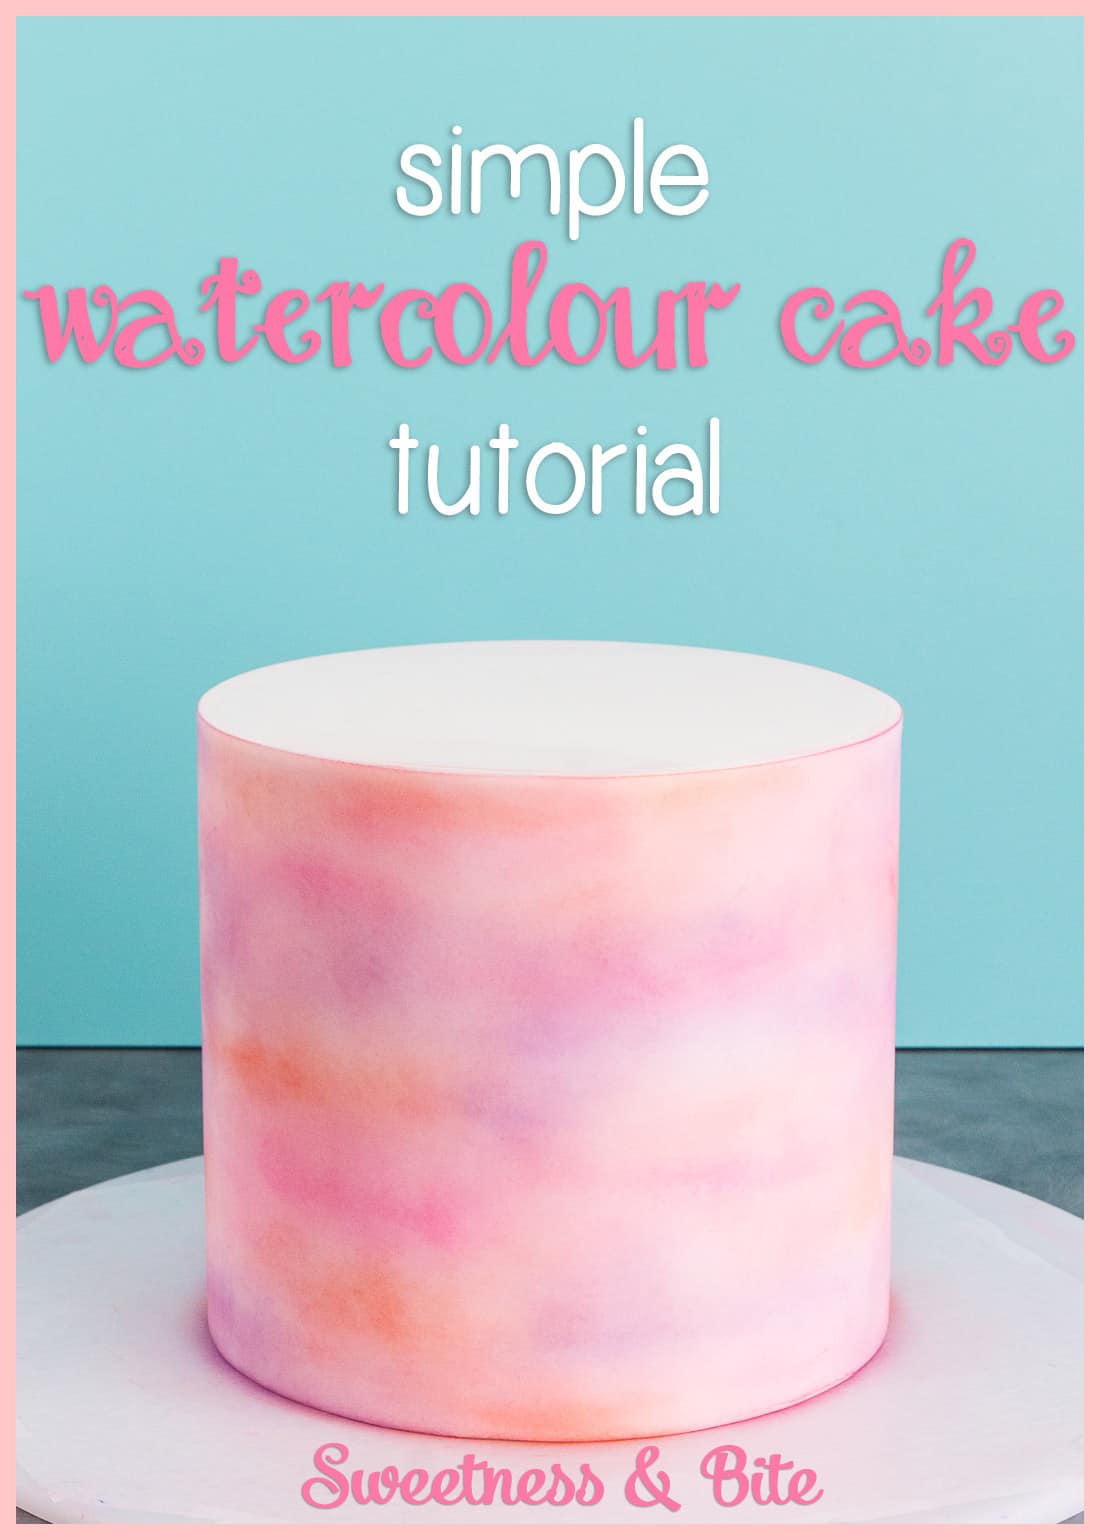 A watercolour fondant cake, in shades of pink, peach and purple.